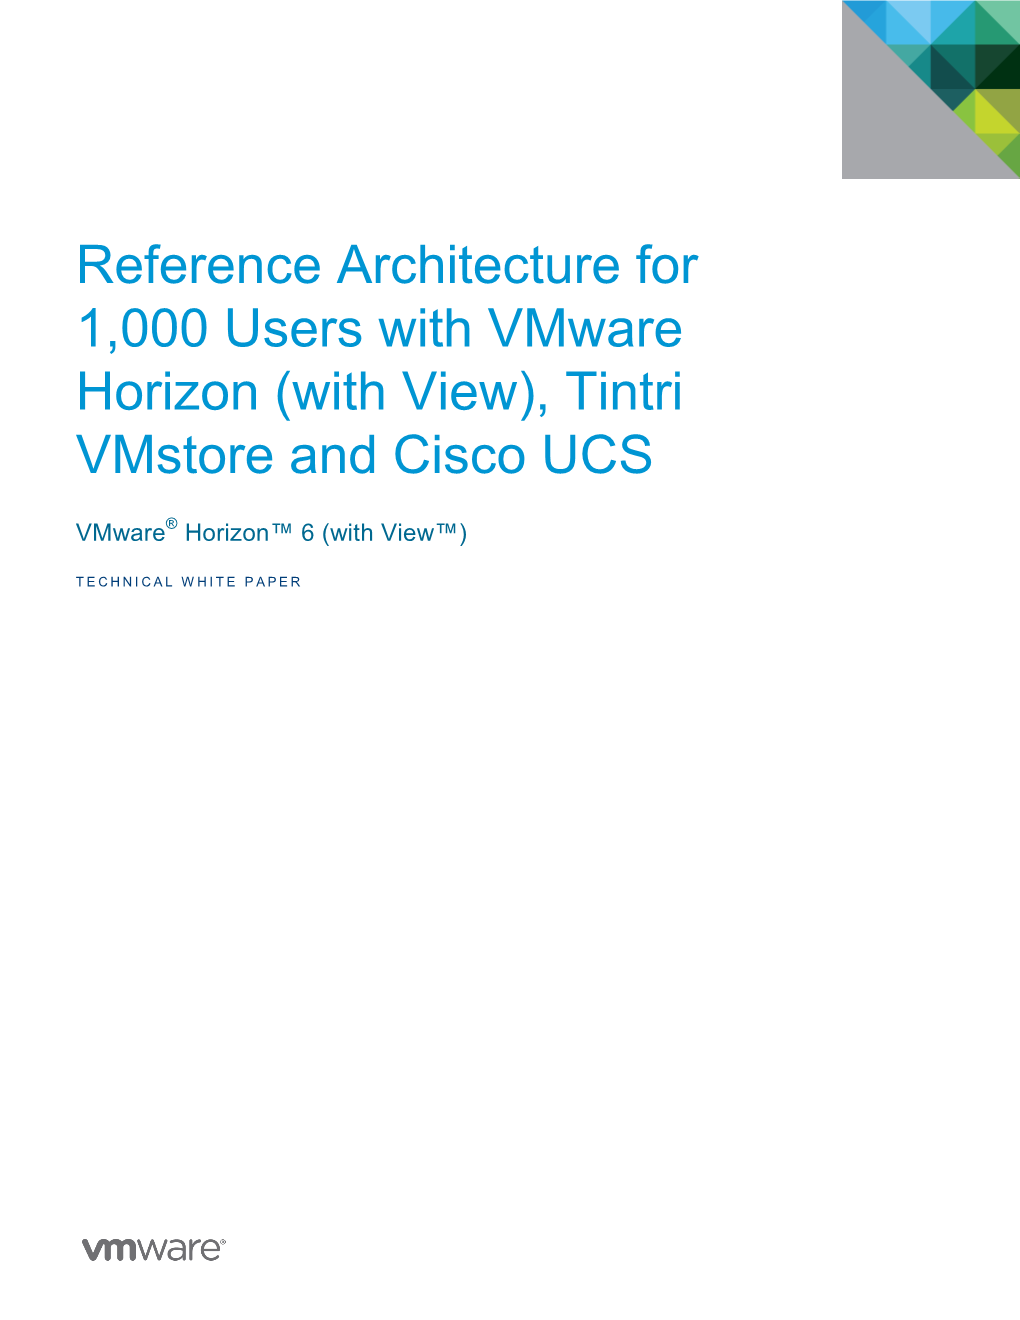 Reference Architecture for 1,000 Users with Vmware Horizon (With View), Tintri Vmstore and Cisco UCS